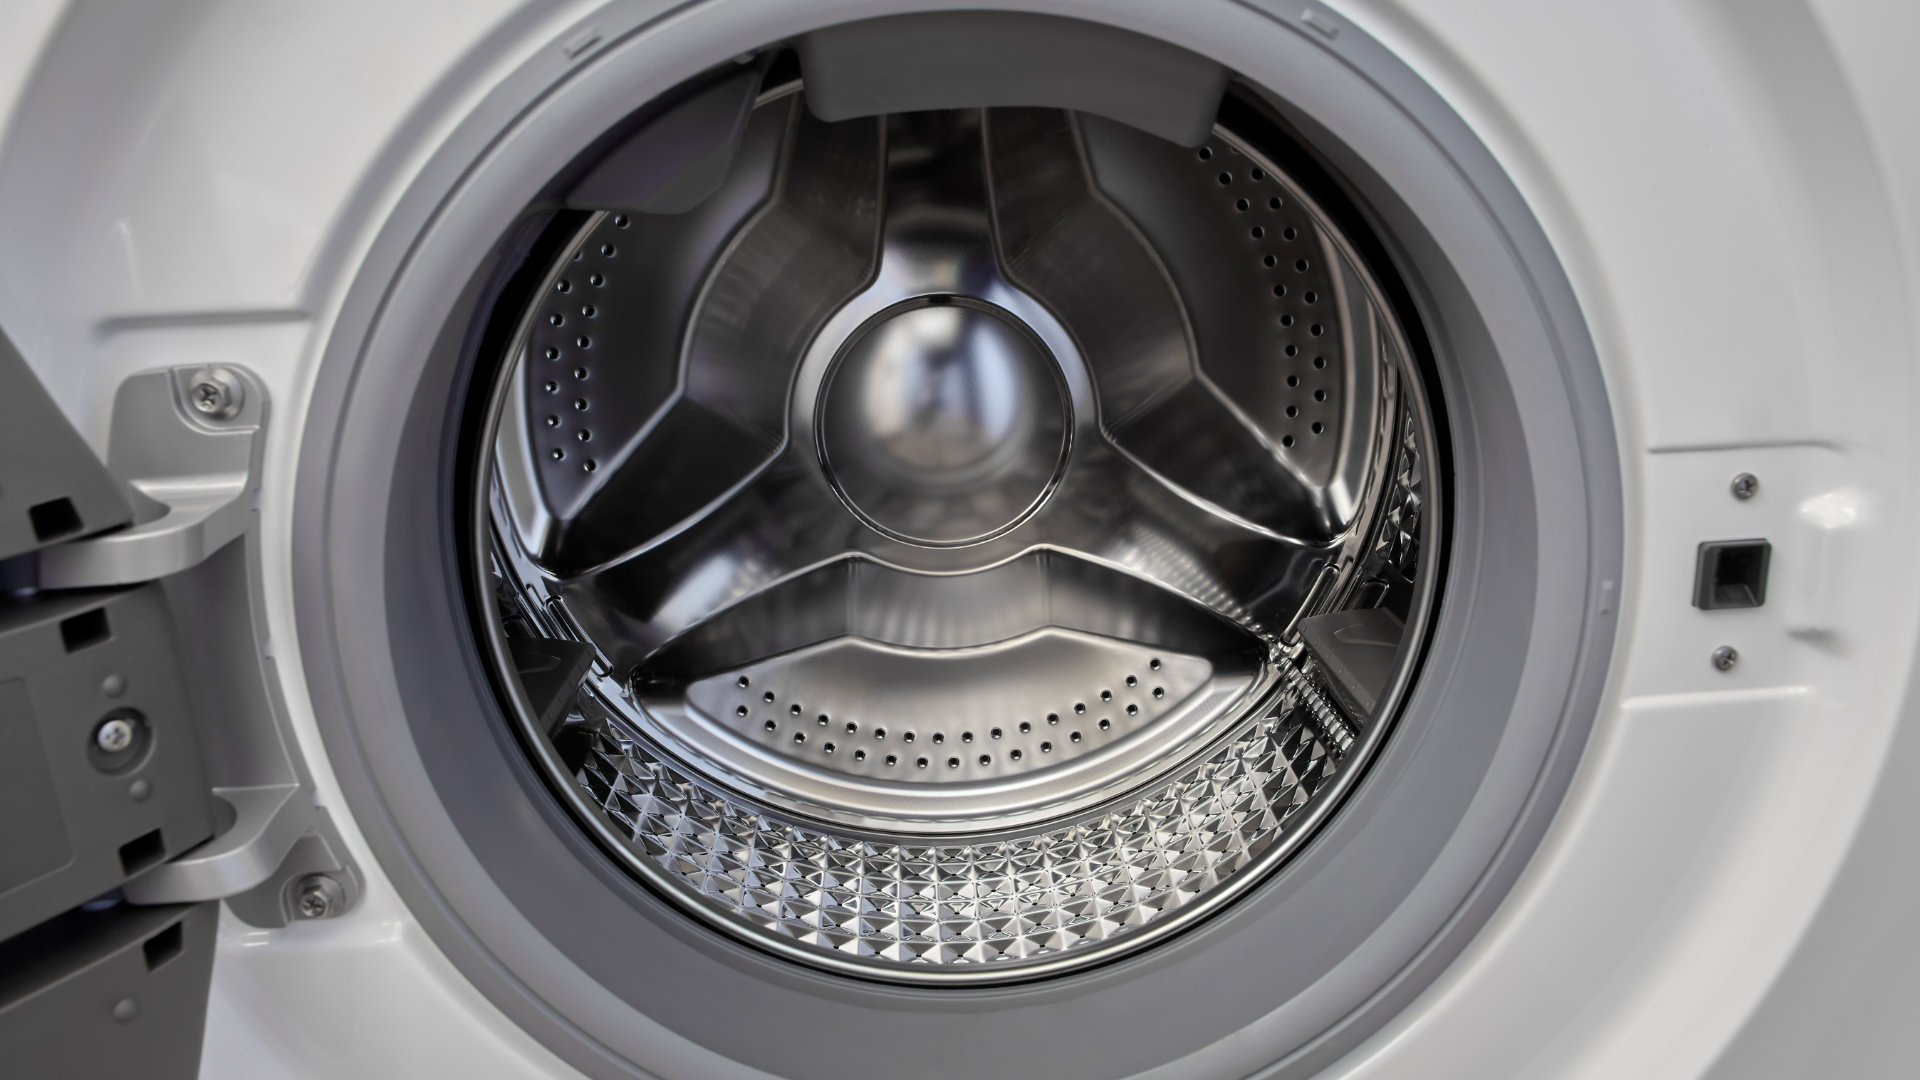 How To Fix The Error Code F86 For Maytag Washing Machine